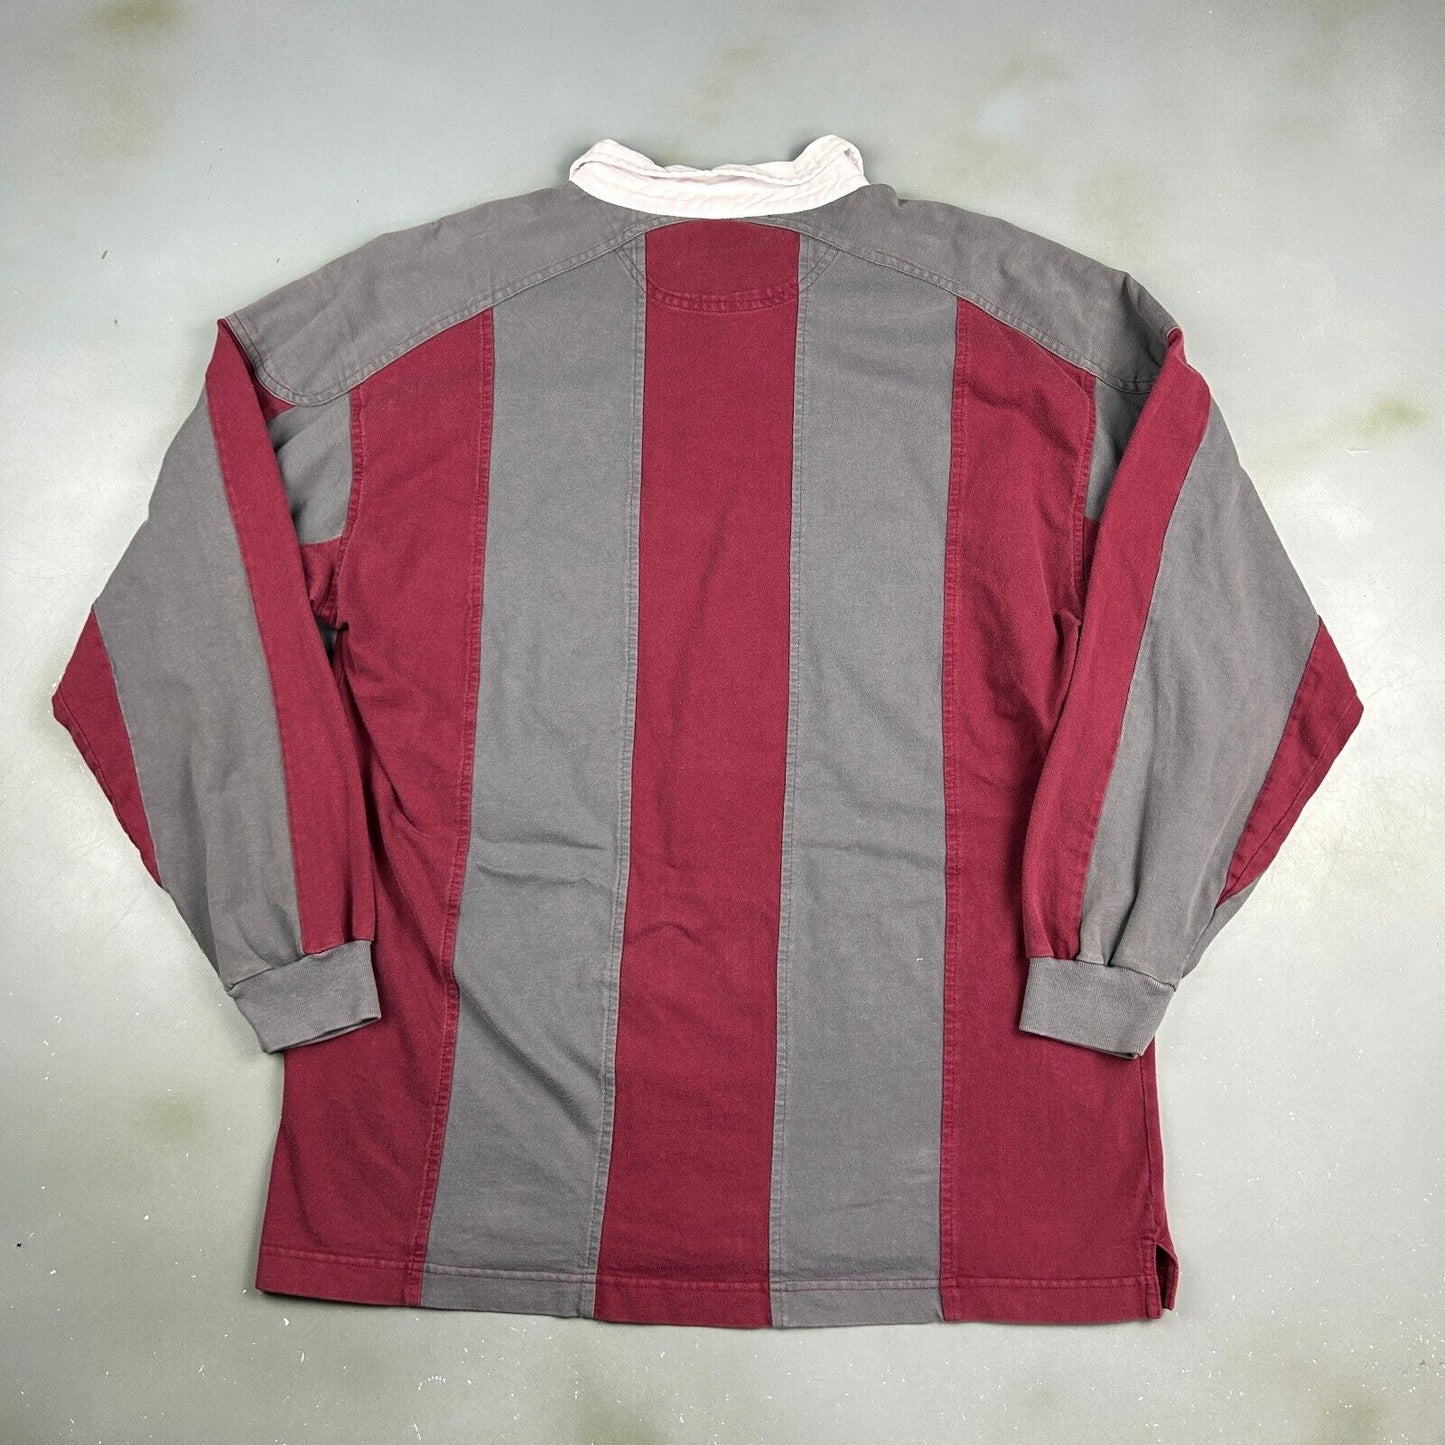 VINTAGE American Eagle Vertical Striped Polo Rugby Shirt sz XL Adult